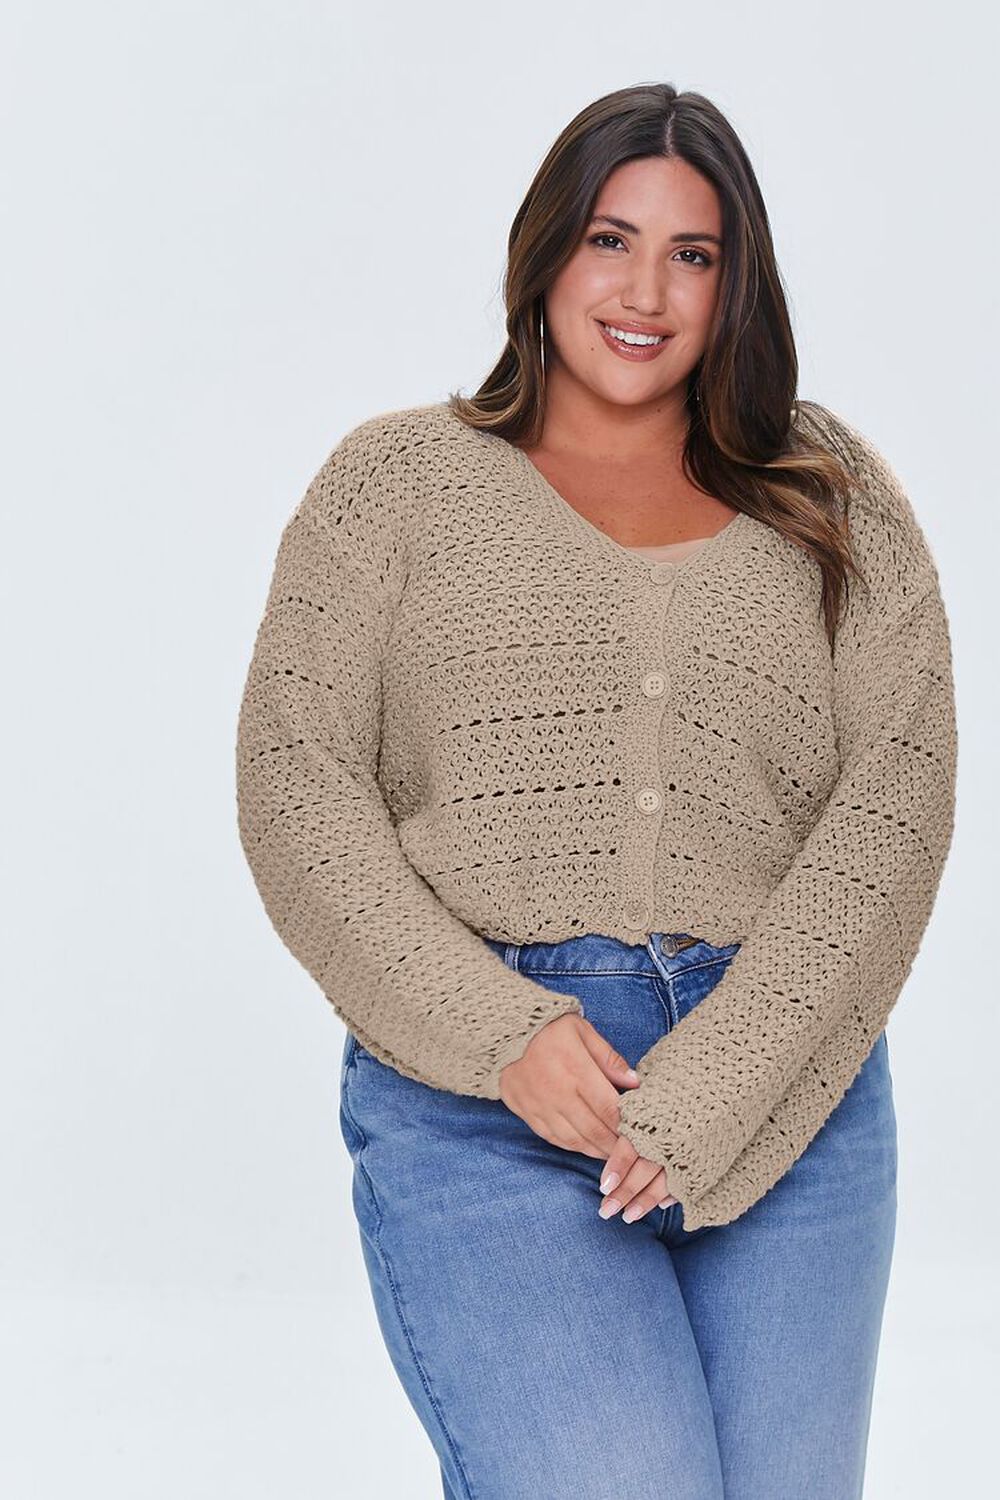 ASH BROWN Plus Size Open-Knit Cardigan Sweater, image 1